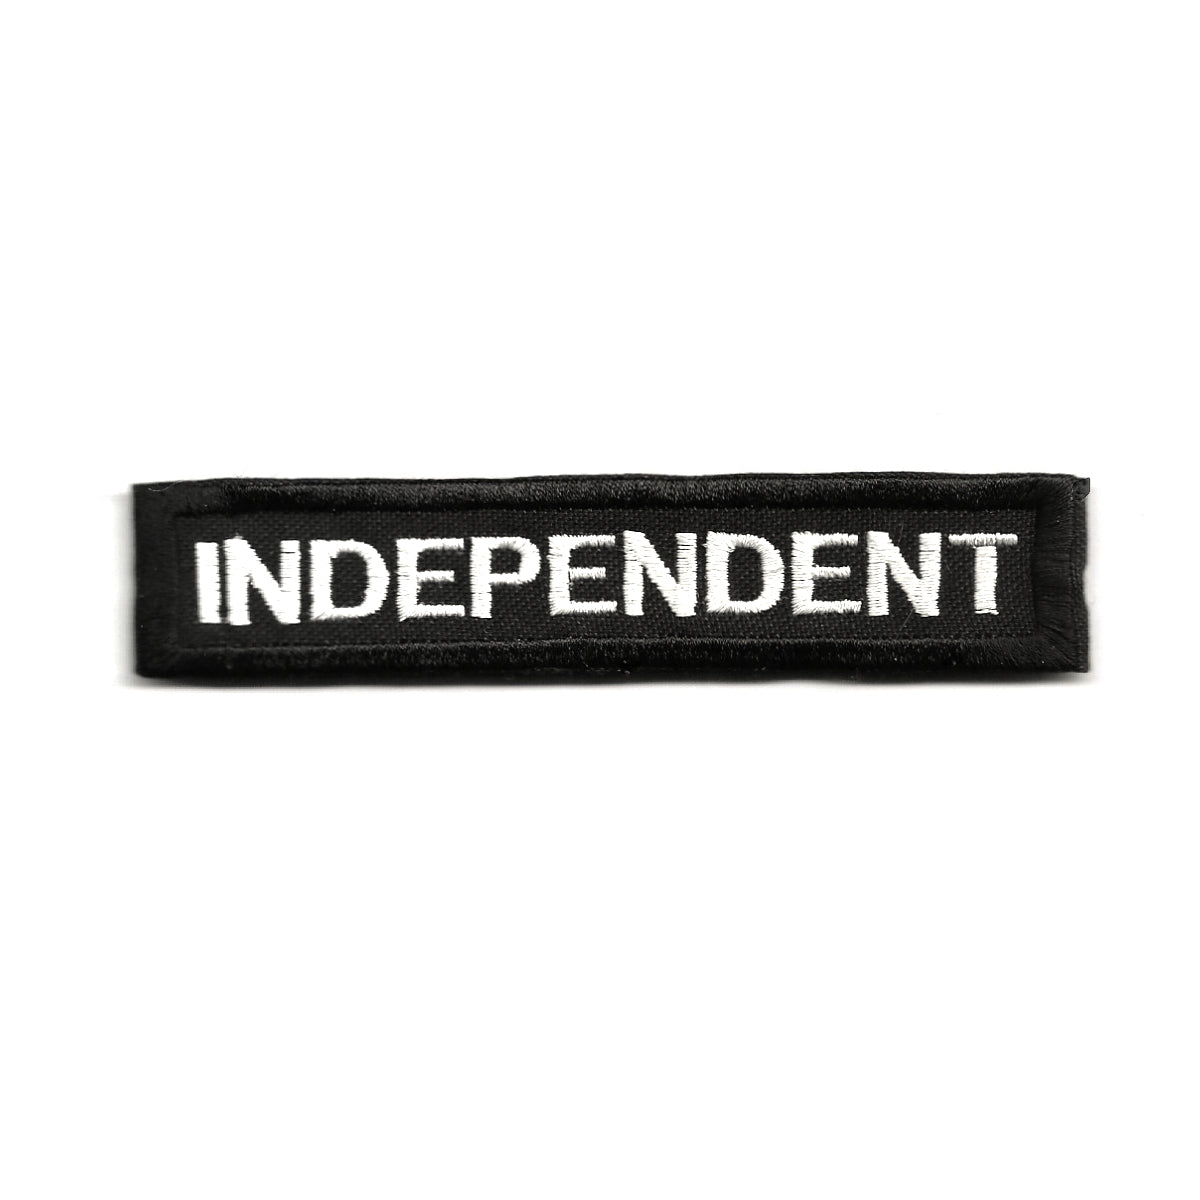 Independent Name Patch- 4.8 x 1 inches